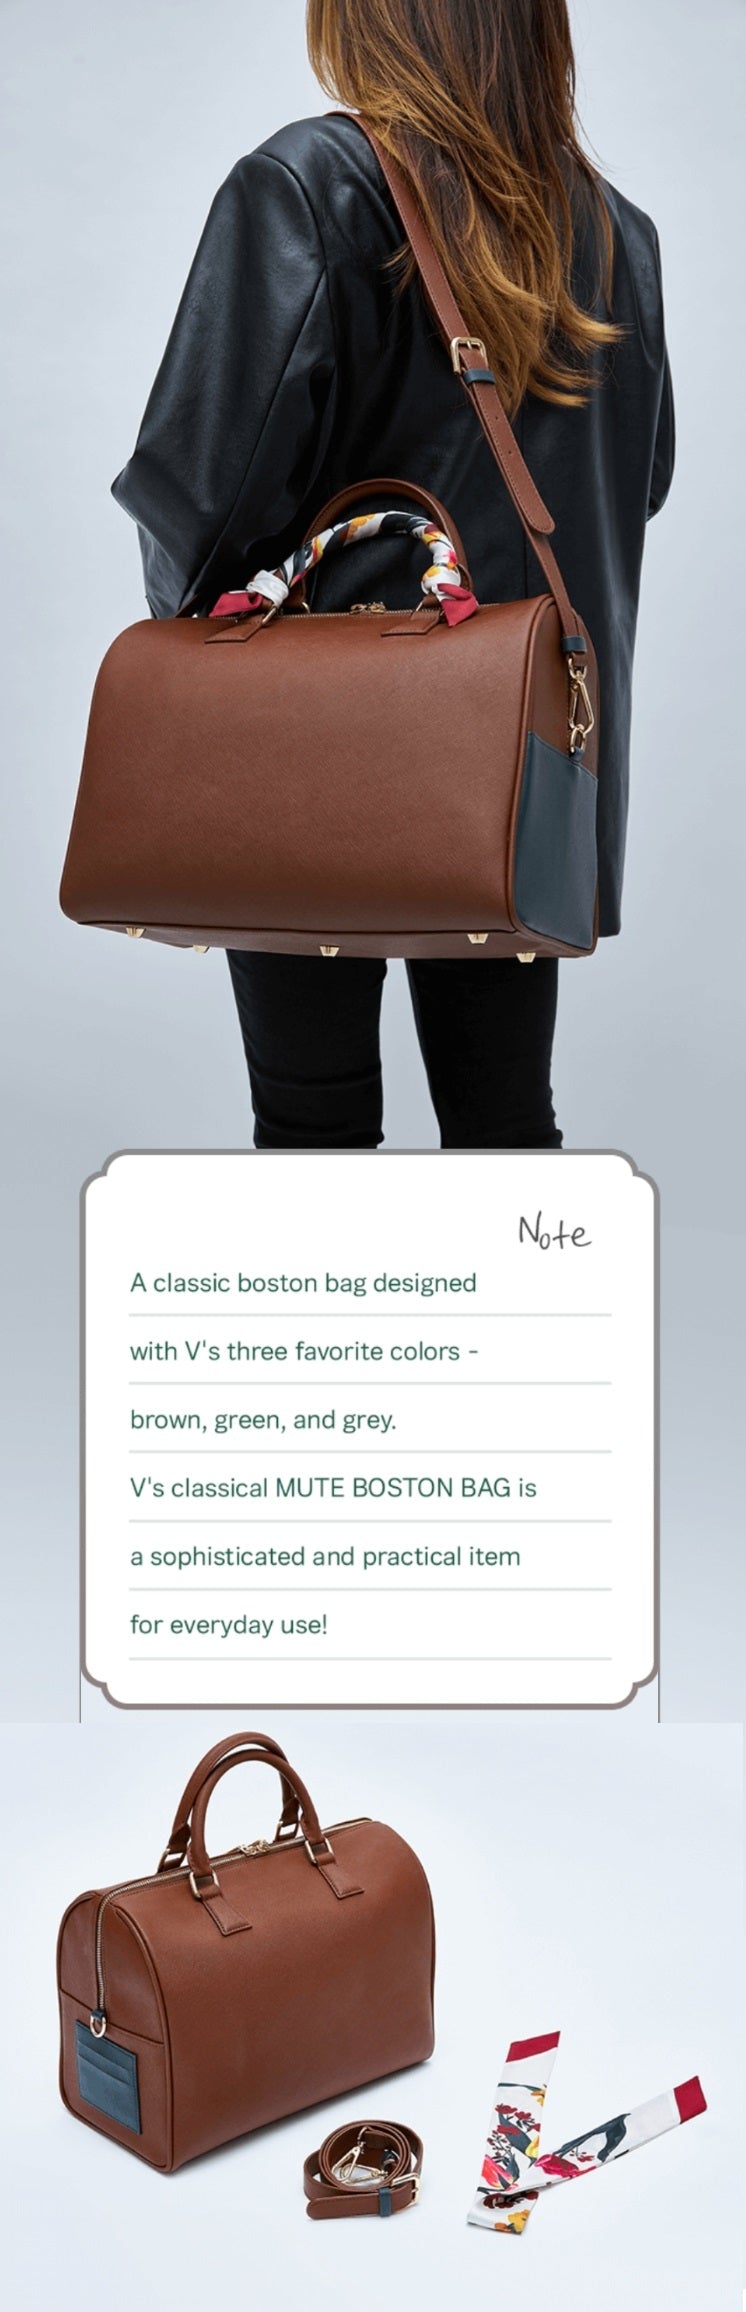 ARTIST MADE COLLECTION BY BTS - V - MUTE BOSTON BAG